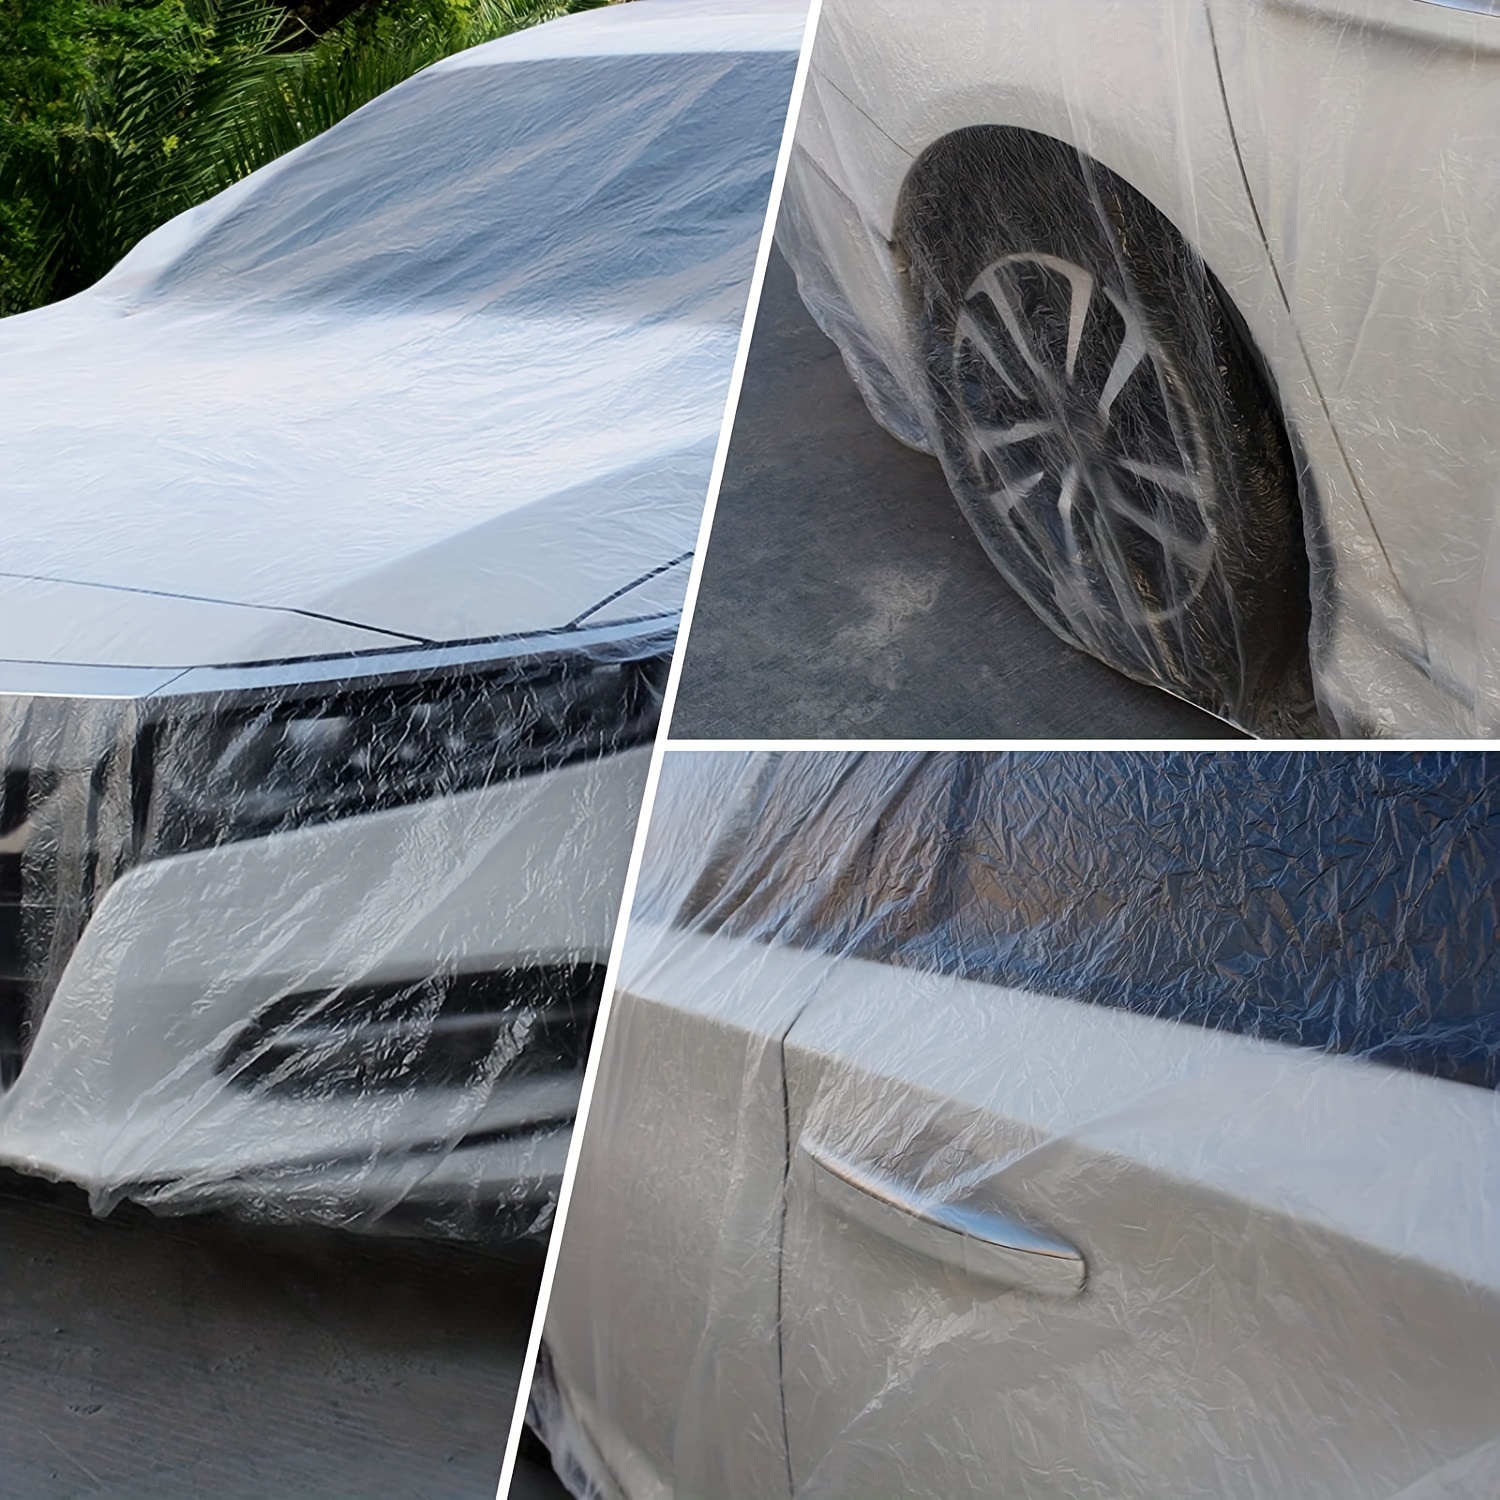 Universal Plastic Car Cover Disposable Waterproof Dustproof Full Exterior  Covers 12.5 x 21.7ft Plastic Full Car Cover with Elastic Band Clear Car